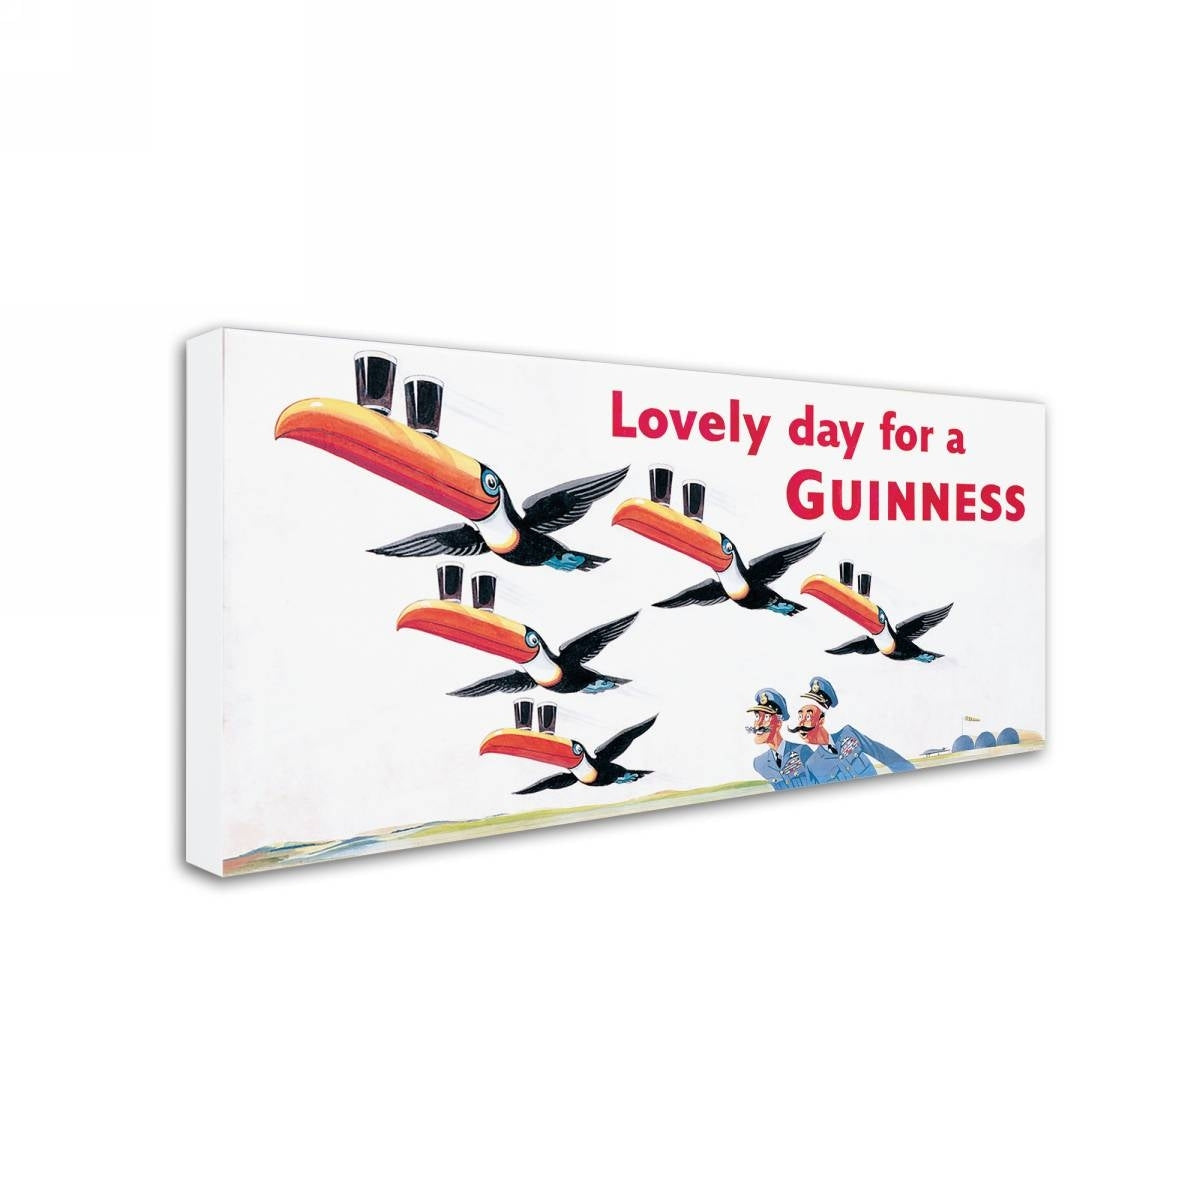 Lovely day for a Guinness Brewery 'Lovely Day For A Guinness IX' Canvas Art by Guinness.